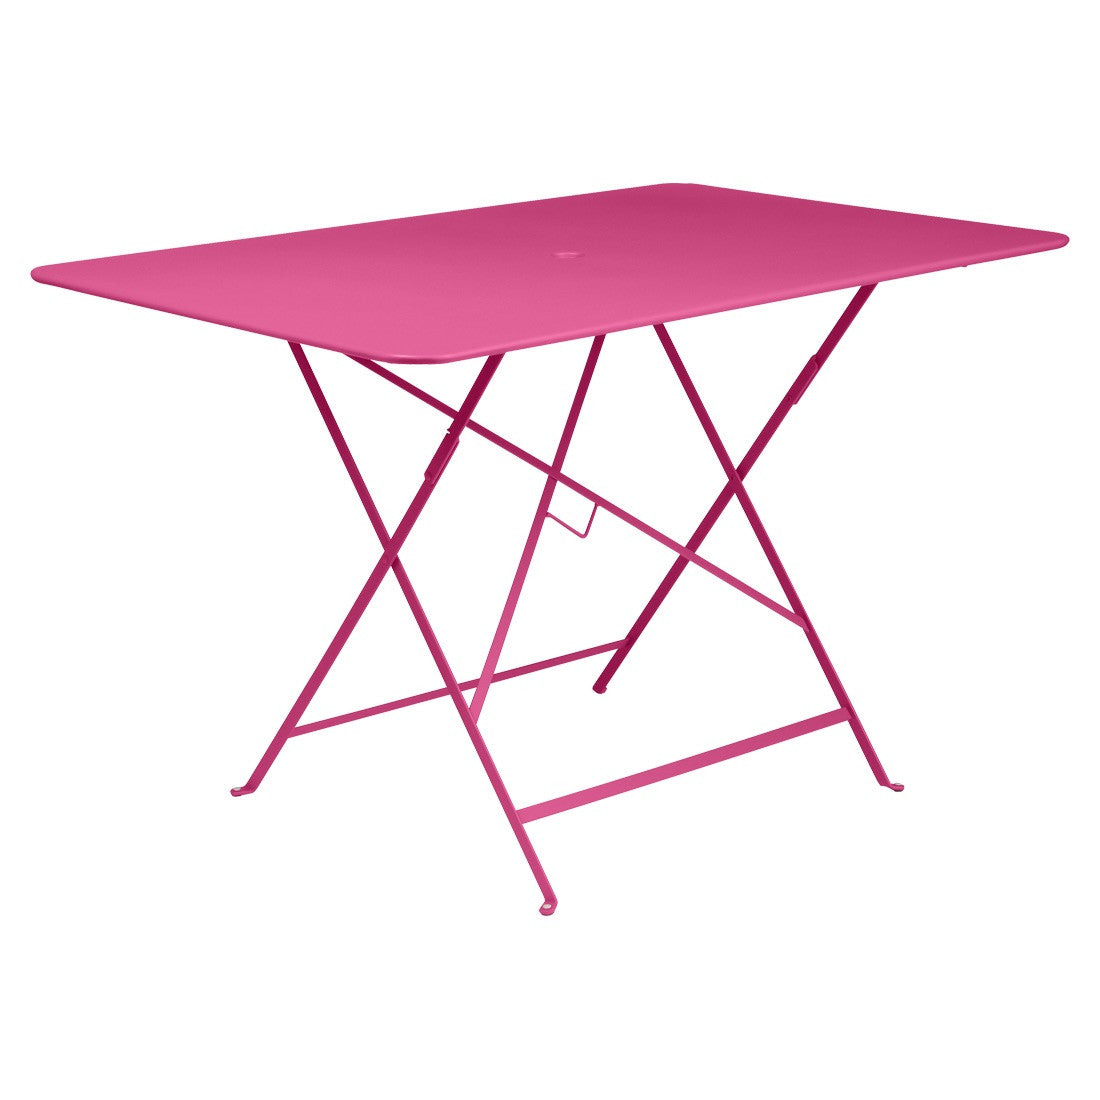 Fermob Bistro 46 inch Rectangle Dining Table - bonmarche